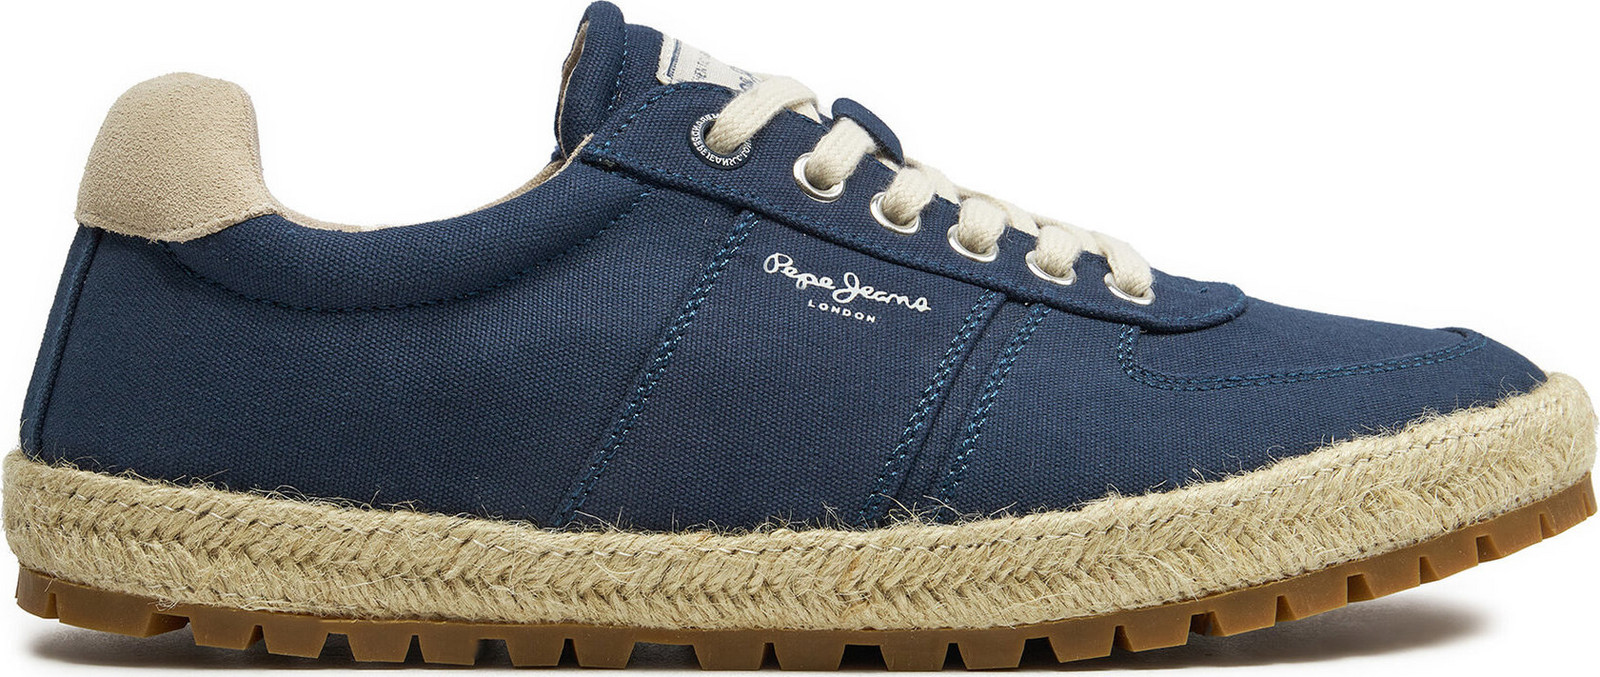 Sneakersy Pepe Jeans Drenan Sporty PMS10323 Washed Navy Blue 576